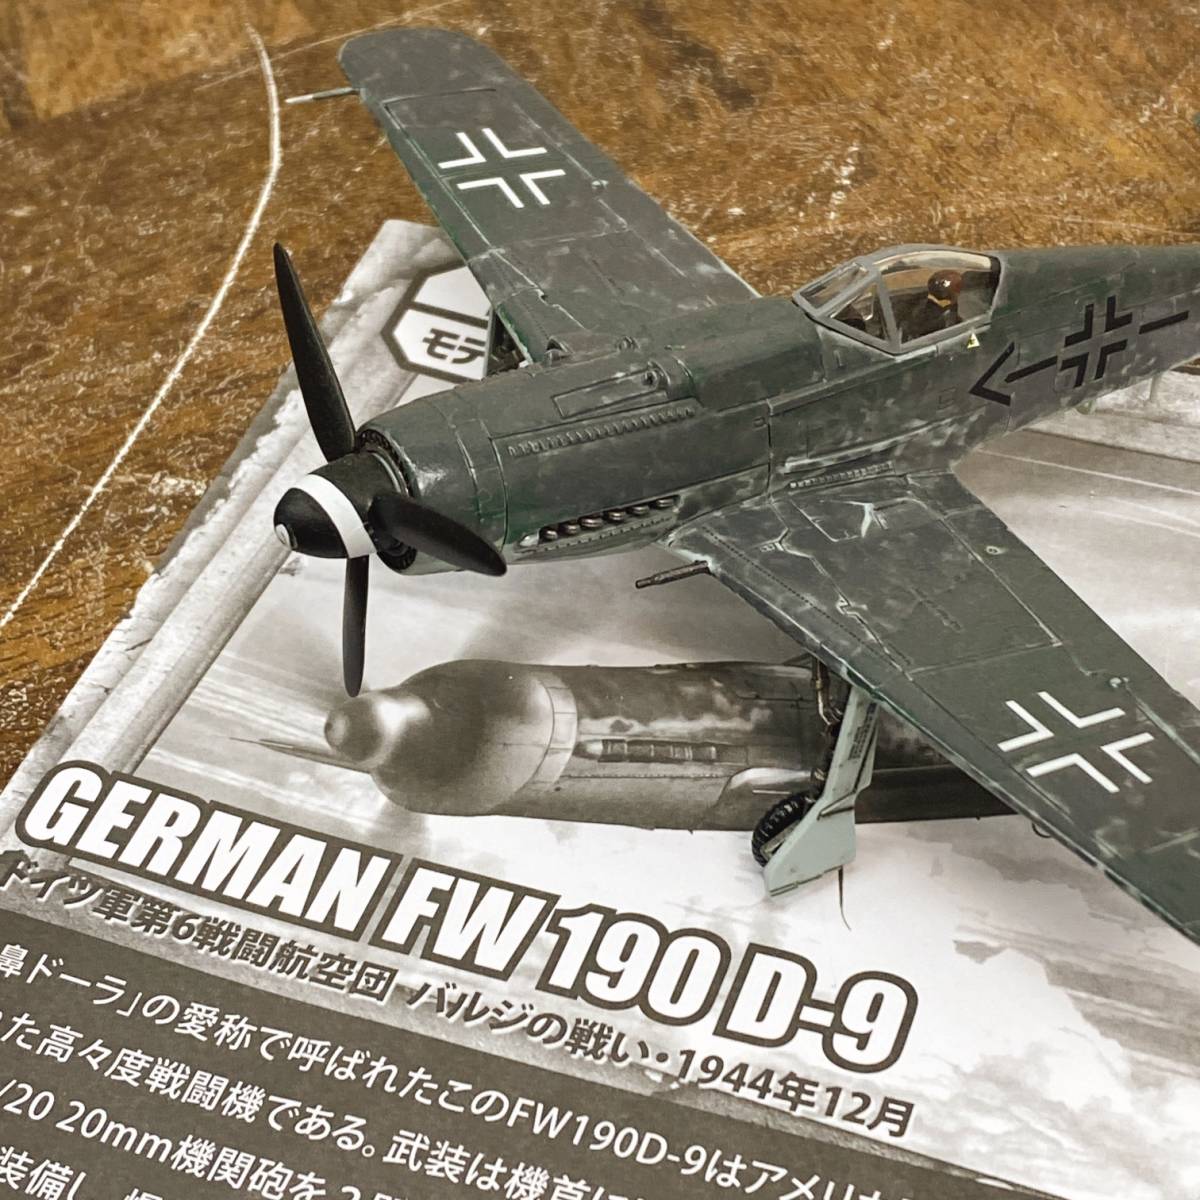 WALTERSONS/ Walter sonzGERMAN FW 190 D-9 1/72 scale Germany army no. 6 war . aviation . construction settled final product plastic model model instructions attaching .E